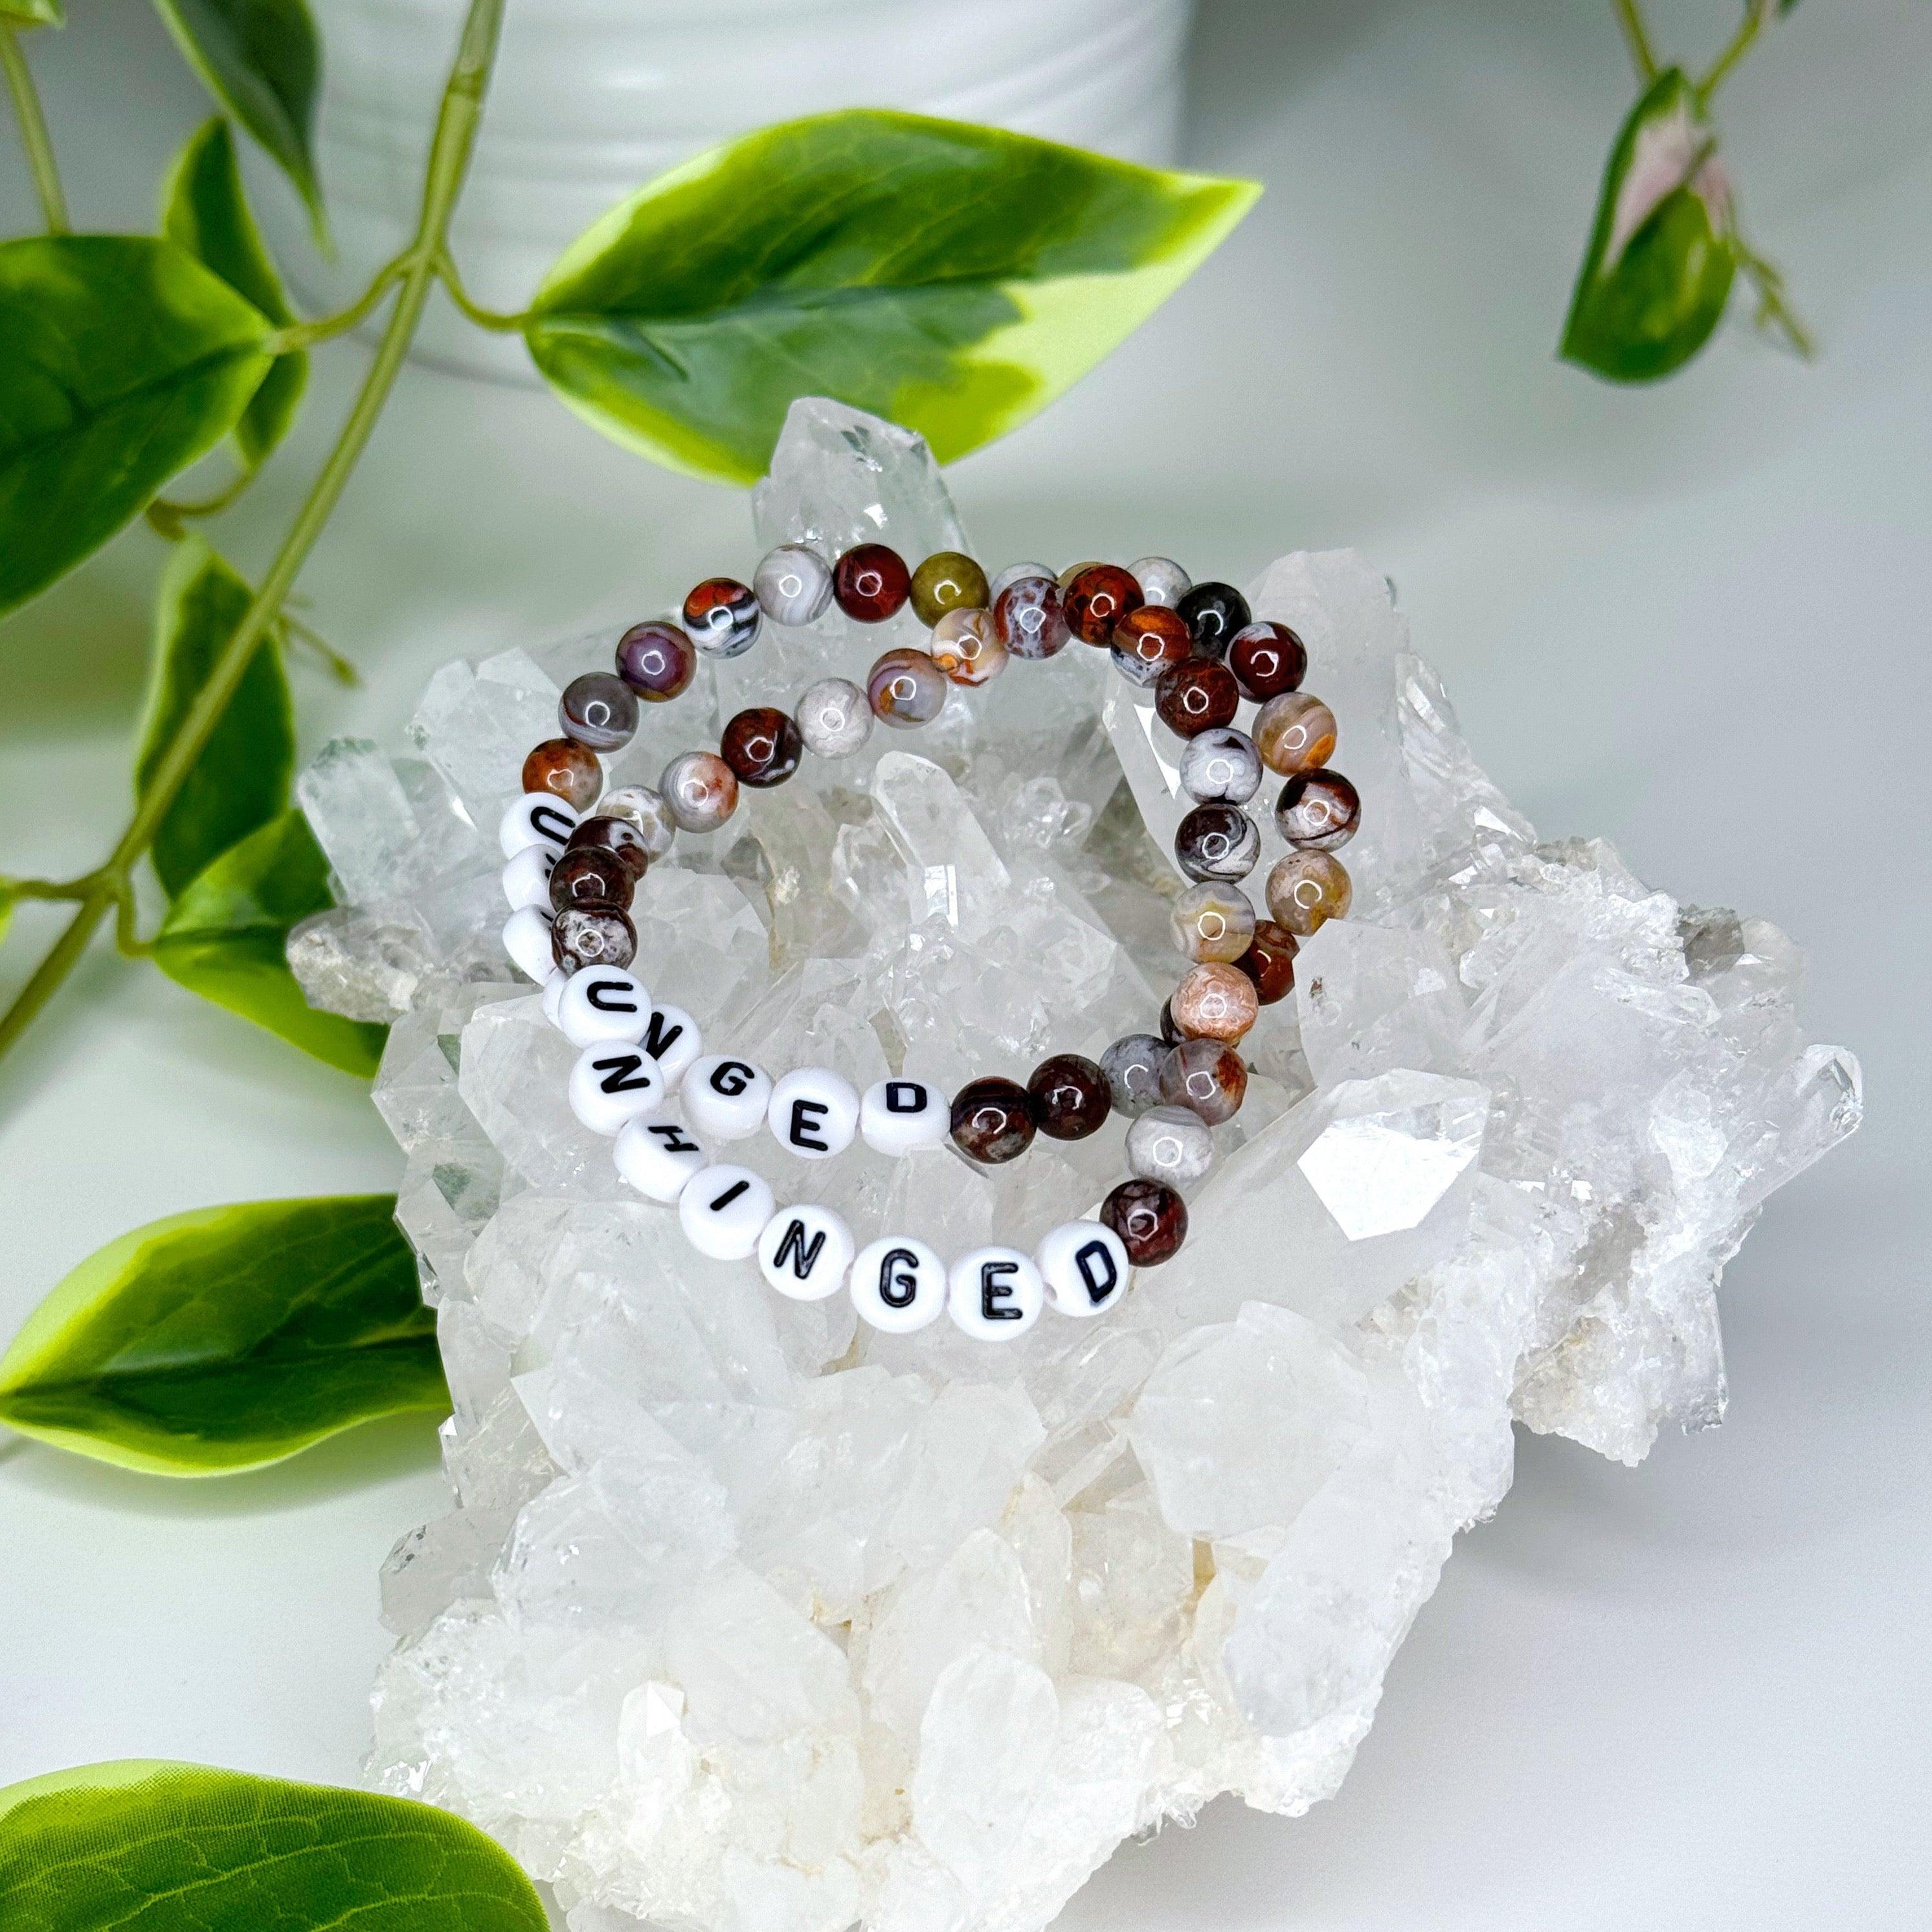 'UNHINGED' LAGUNA AGATE 6mm - HANDMADE CRYSTAL BRACELET - 6mm, agate, bracelet, brown, crystal bracelet, fire, gemini, gemini stack, grey, handmade bracelet, jewelry, laguna agate, market bracelet, mixed colors, recently added, spring collection, unhinged, Wearable - The Mineral Maven